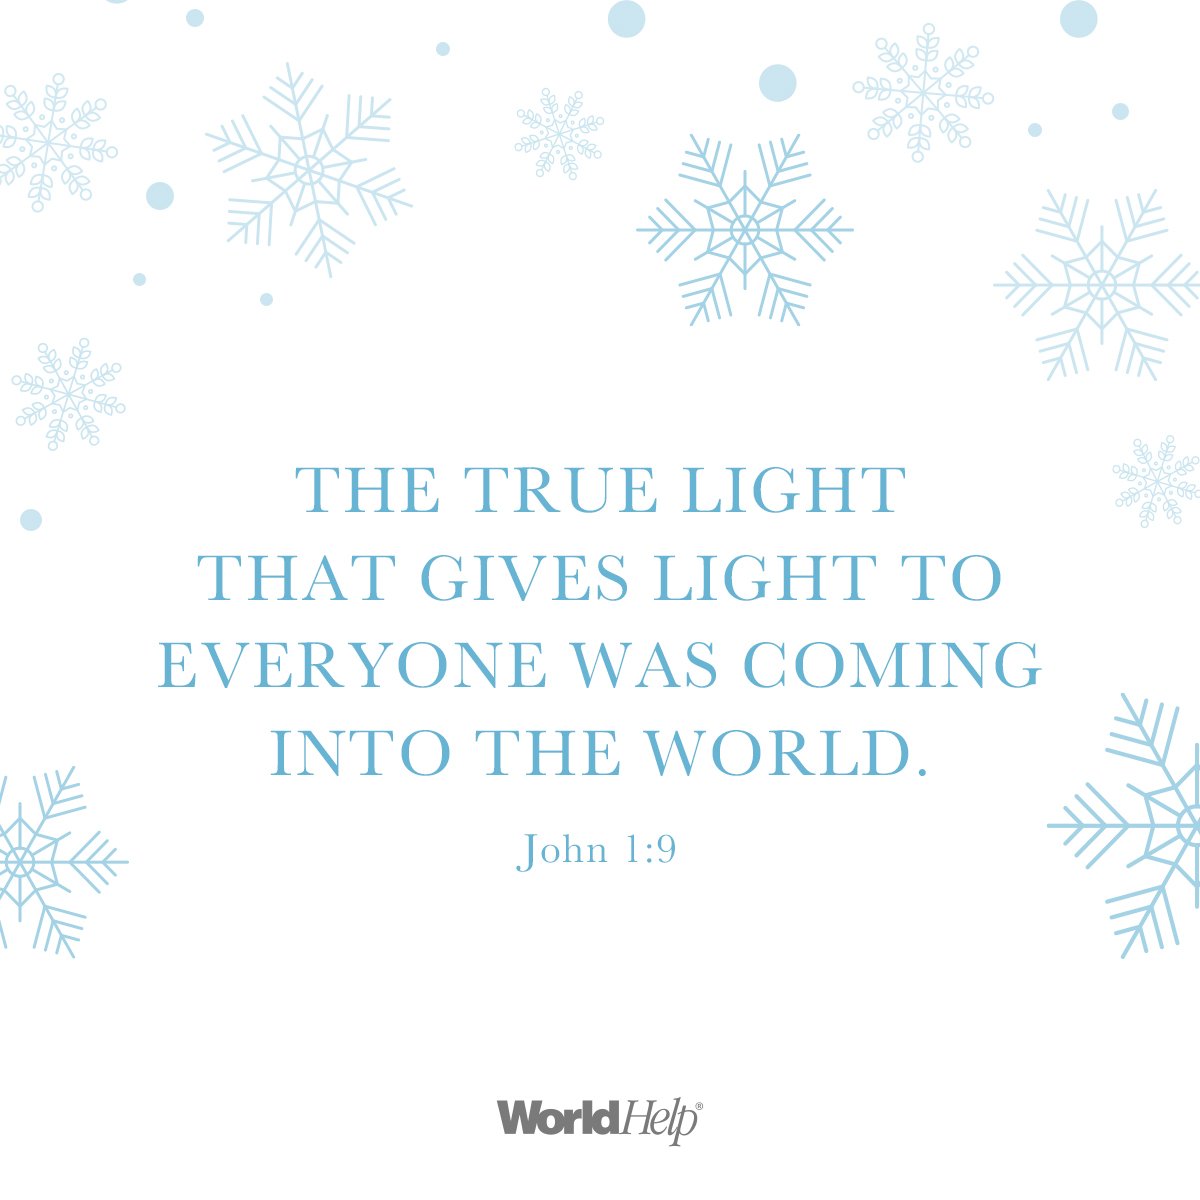 THE TRUE LIGHT THAT GIVES LIGHT TO EVERYONE WAS COMING INTO THE WORLD. John 1.9 WorldHelp